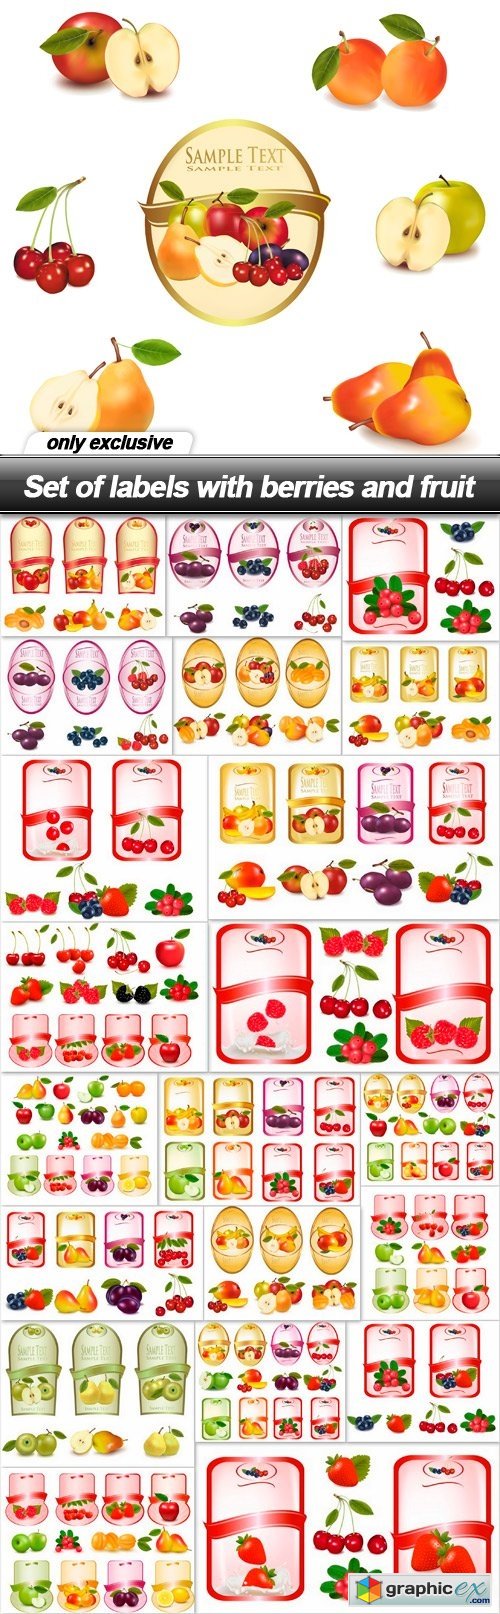 Set of labels with berries and fruit - 22 EPS